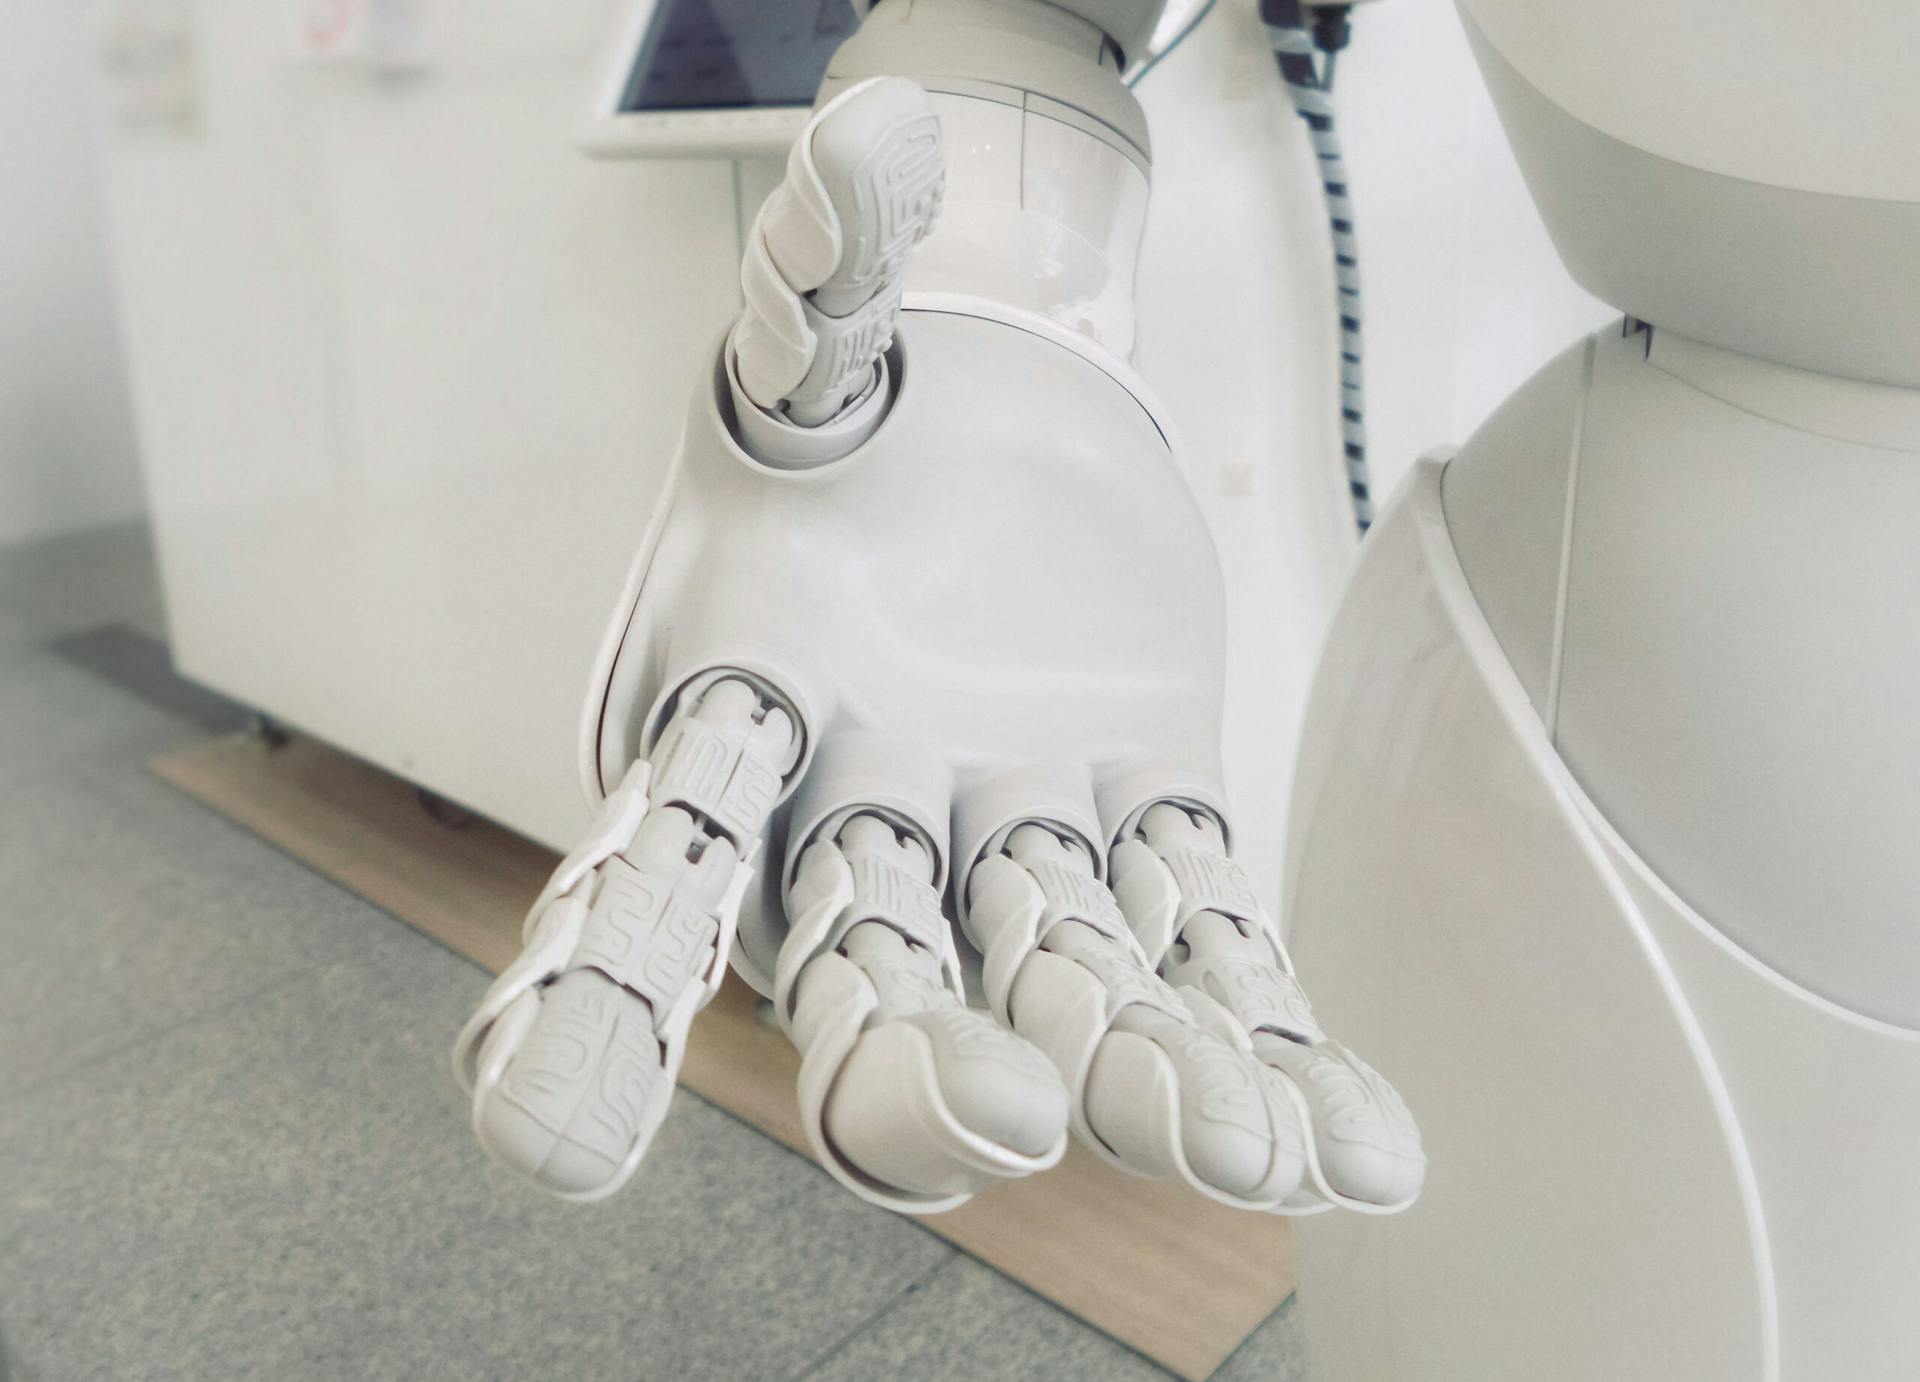 Image Showing an Robot Hand